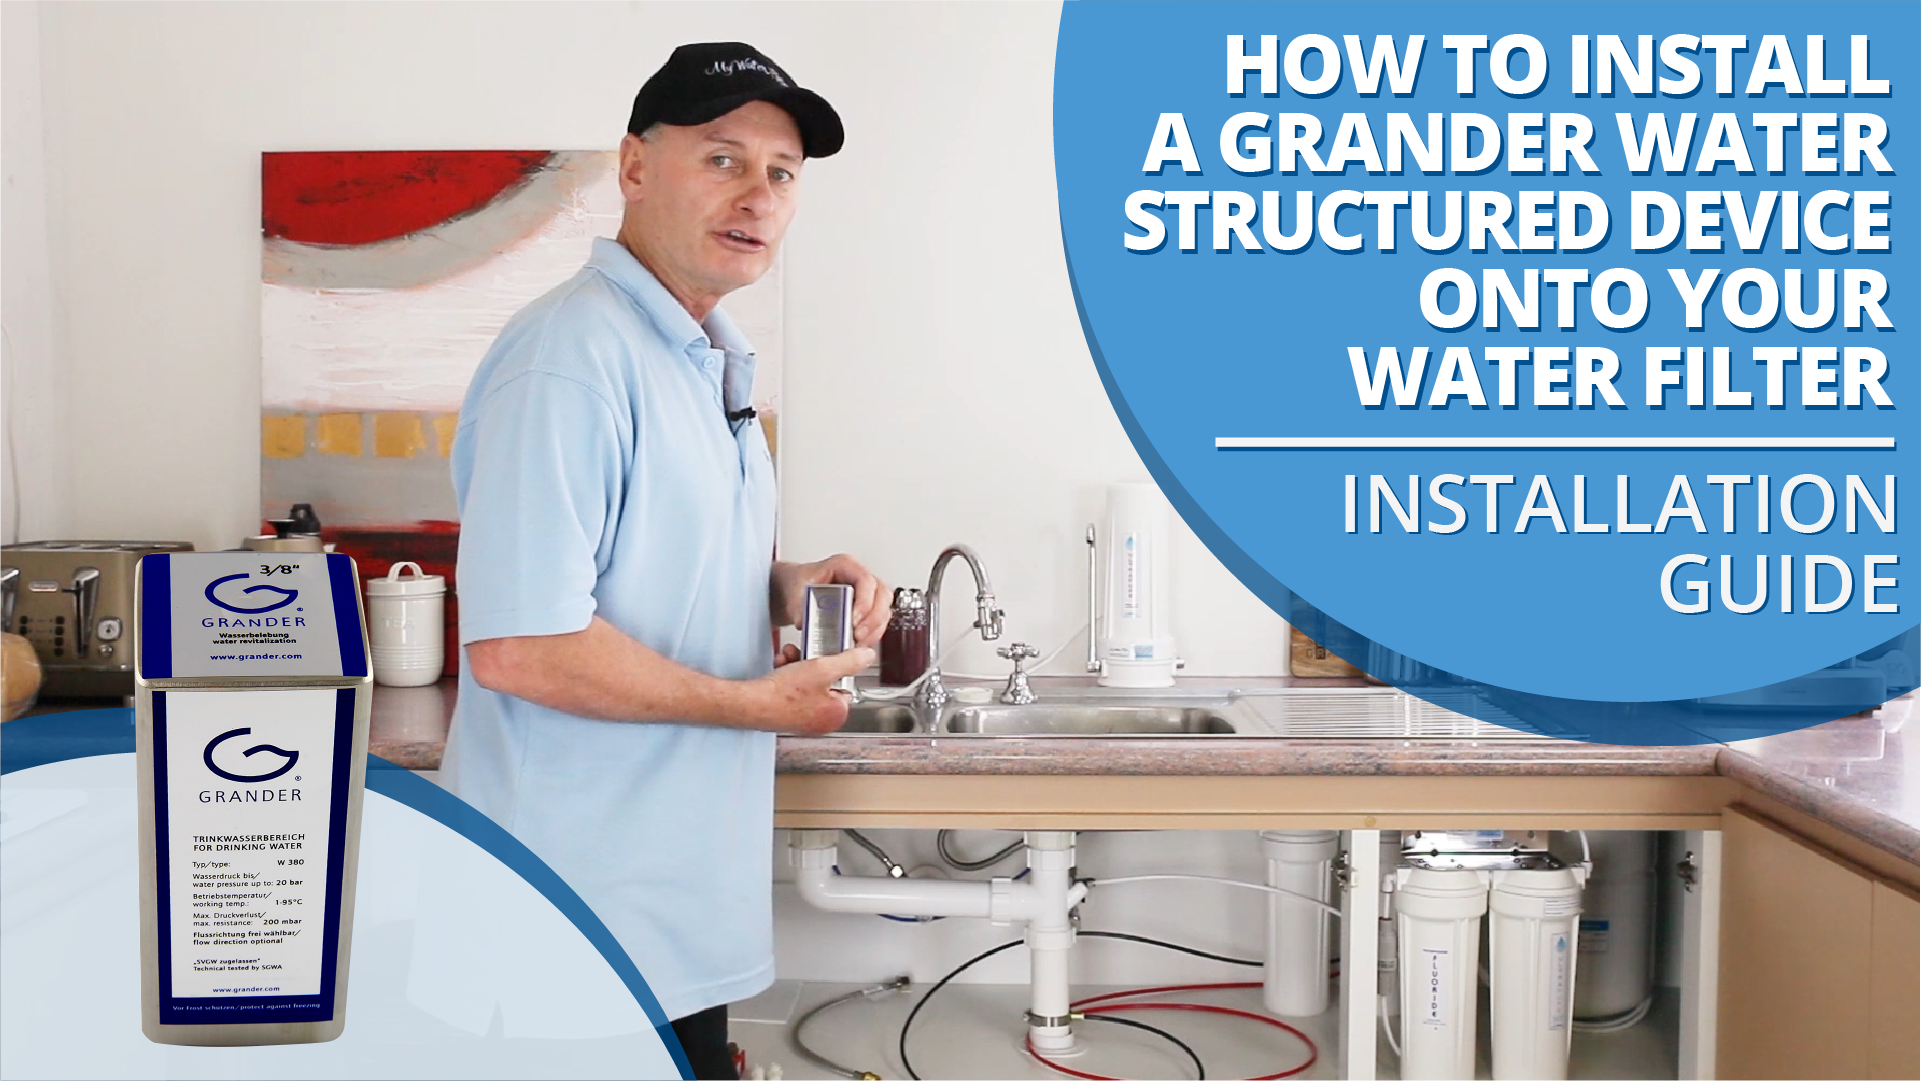 [VIDEO] How to Install a Grander Water Structuring Device onto your Water Filter